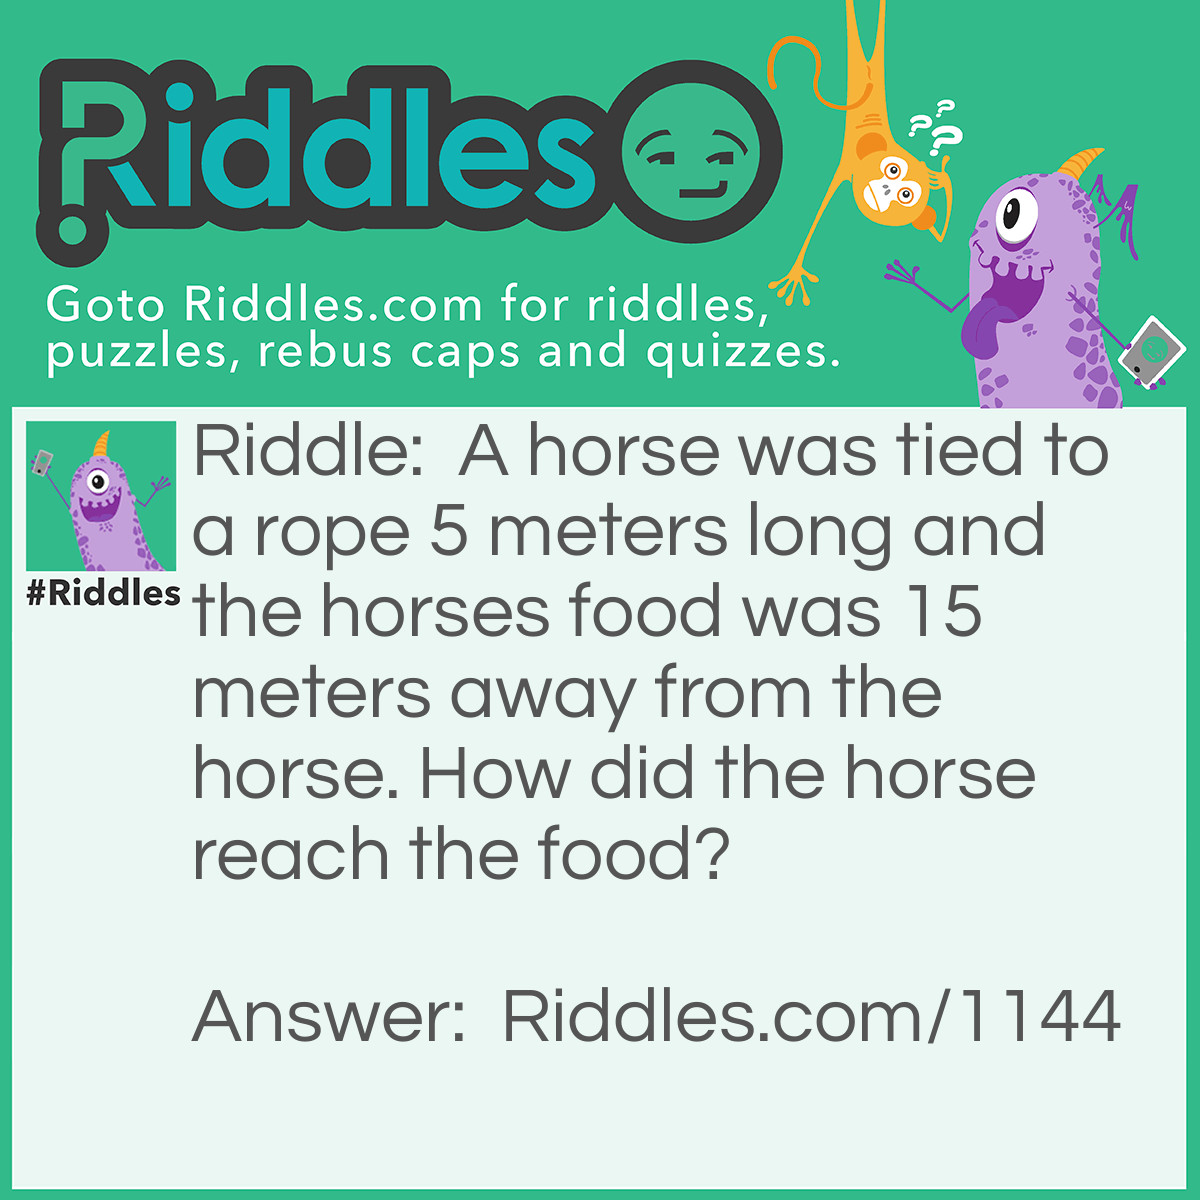 Riddle: A horse was tied to a rope 5 meters long and the horses food was 15 meters away from the horse. How did the horse reach the food? Answer: The rope wasn't tied to anything so he could reach the food.